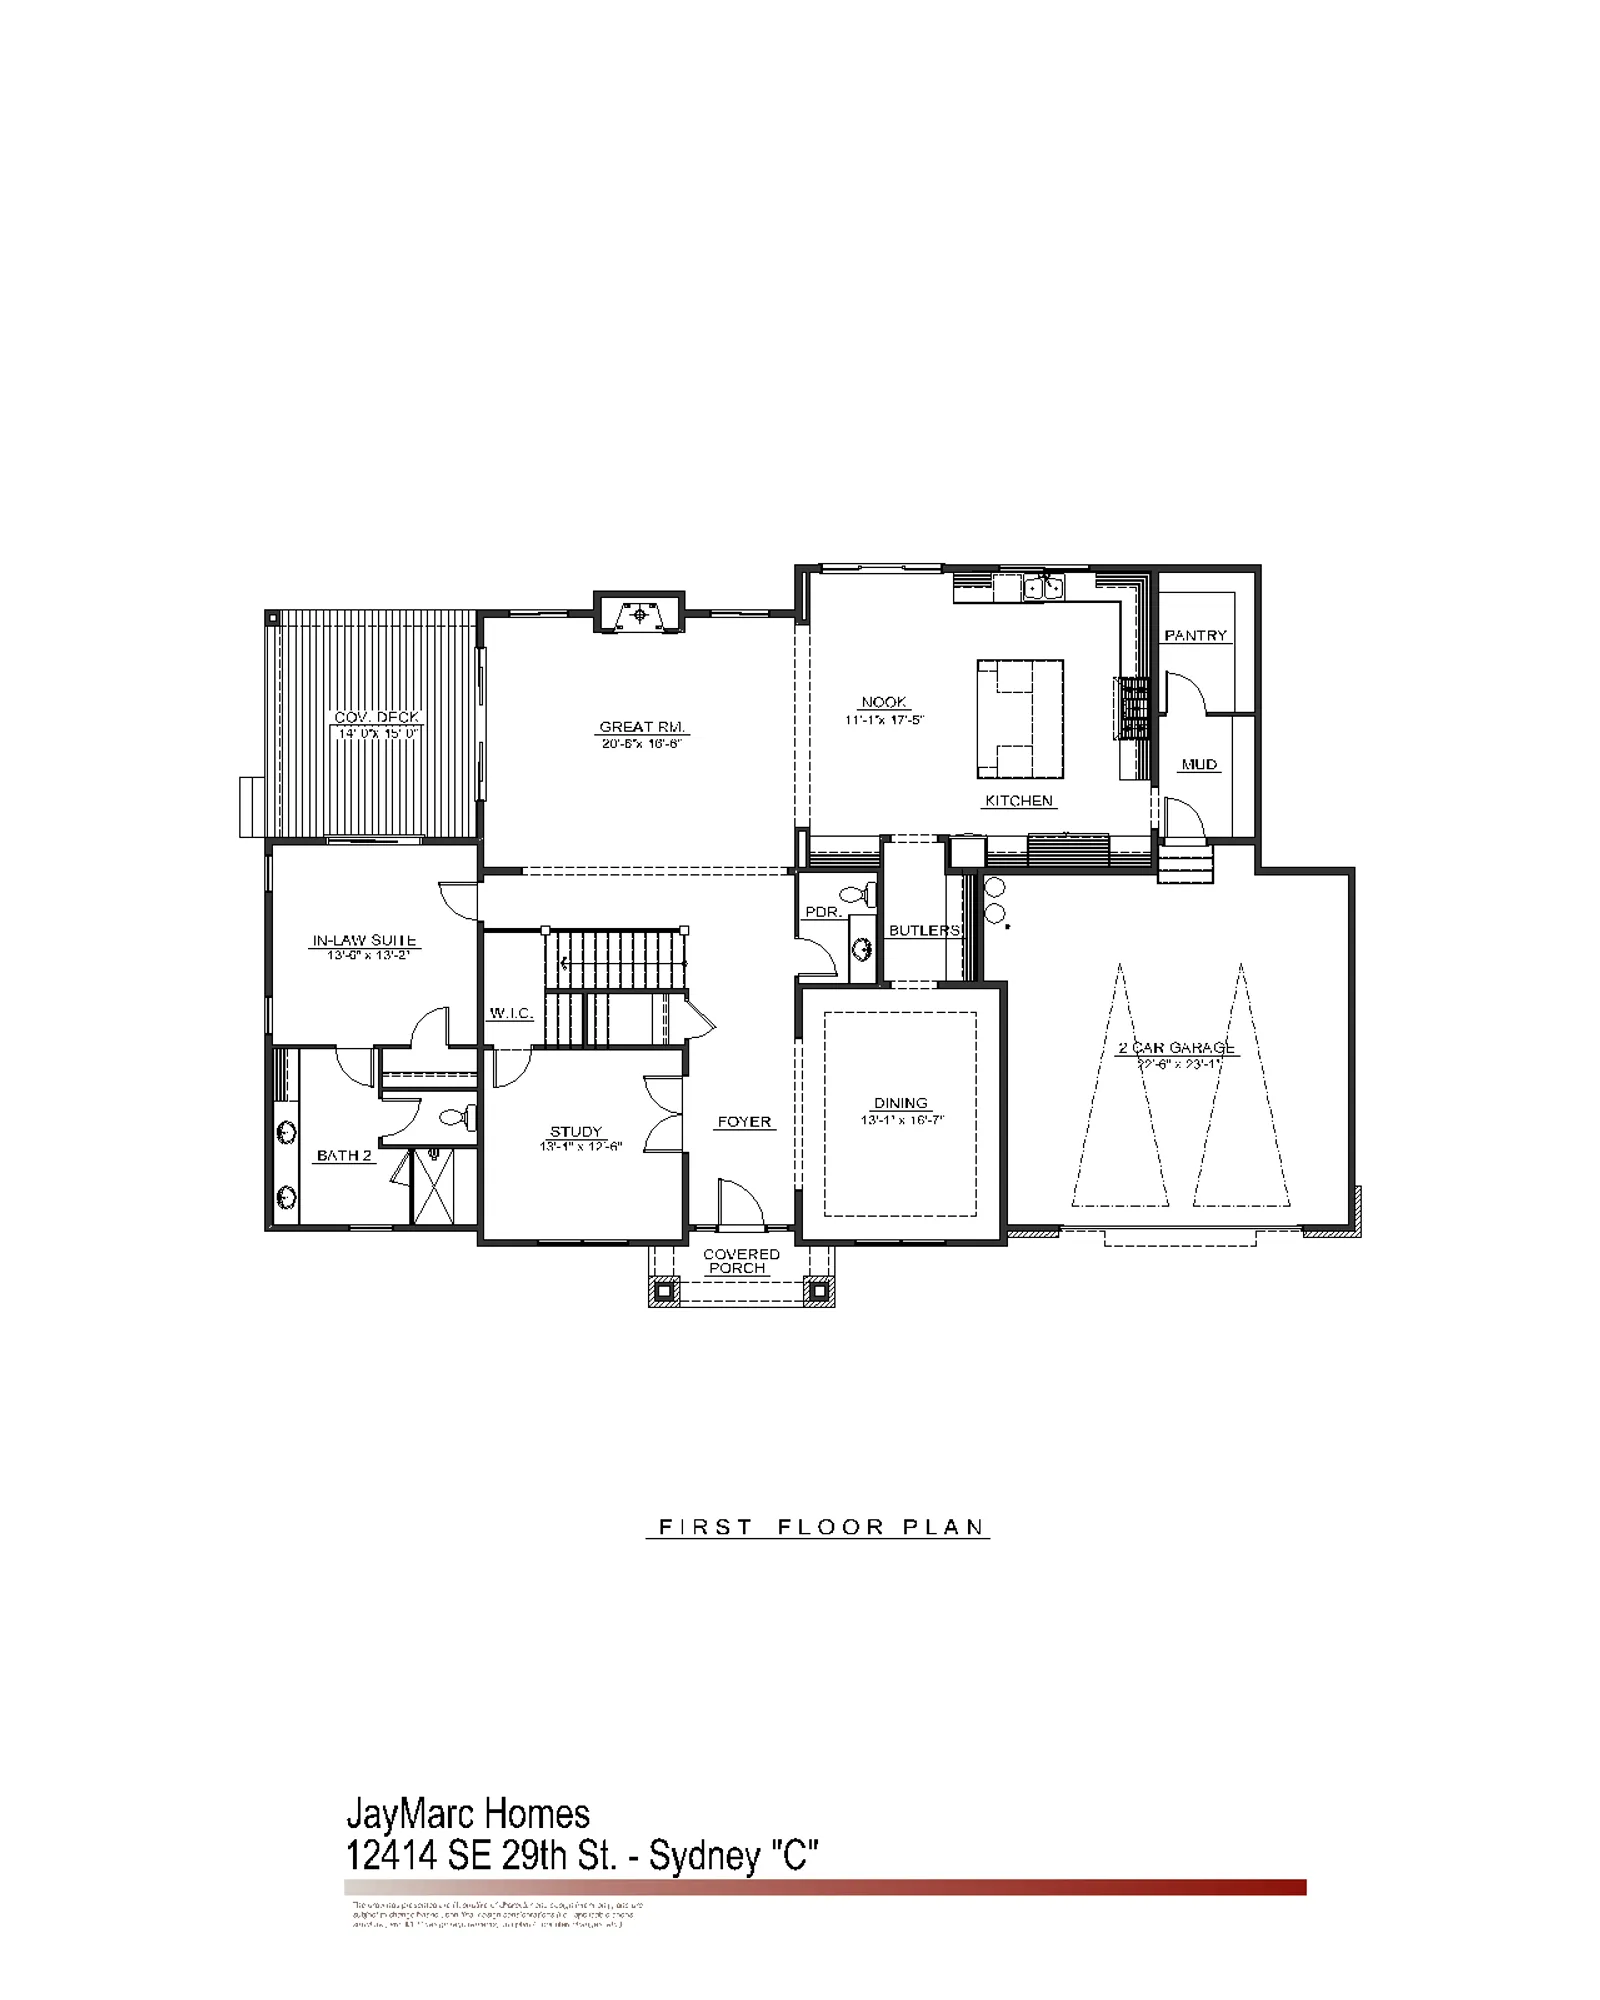 First Floor Plan by JayMarc Homes